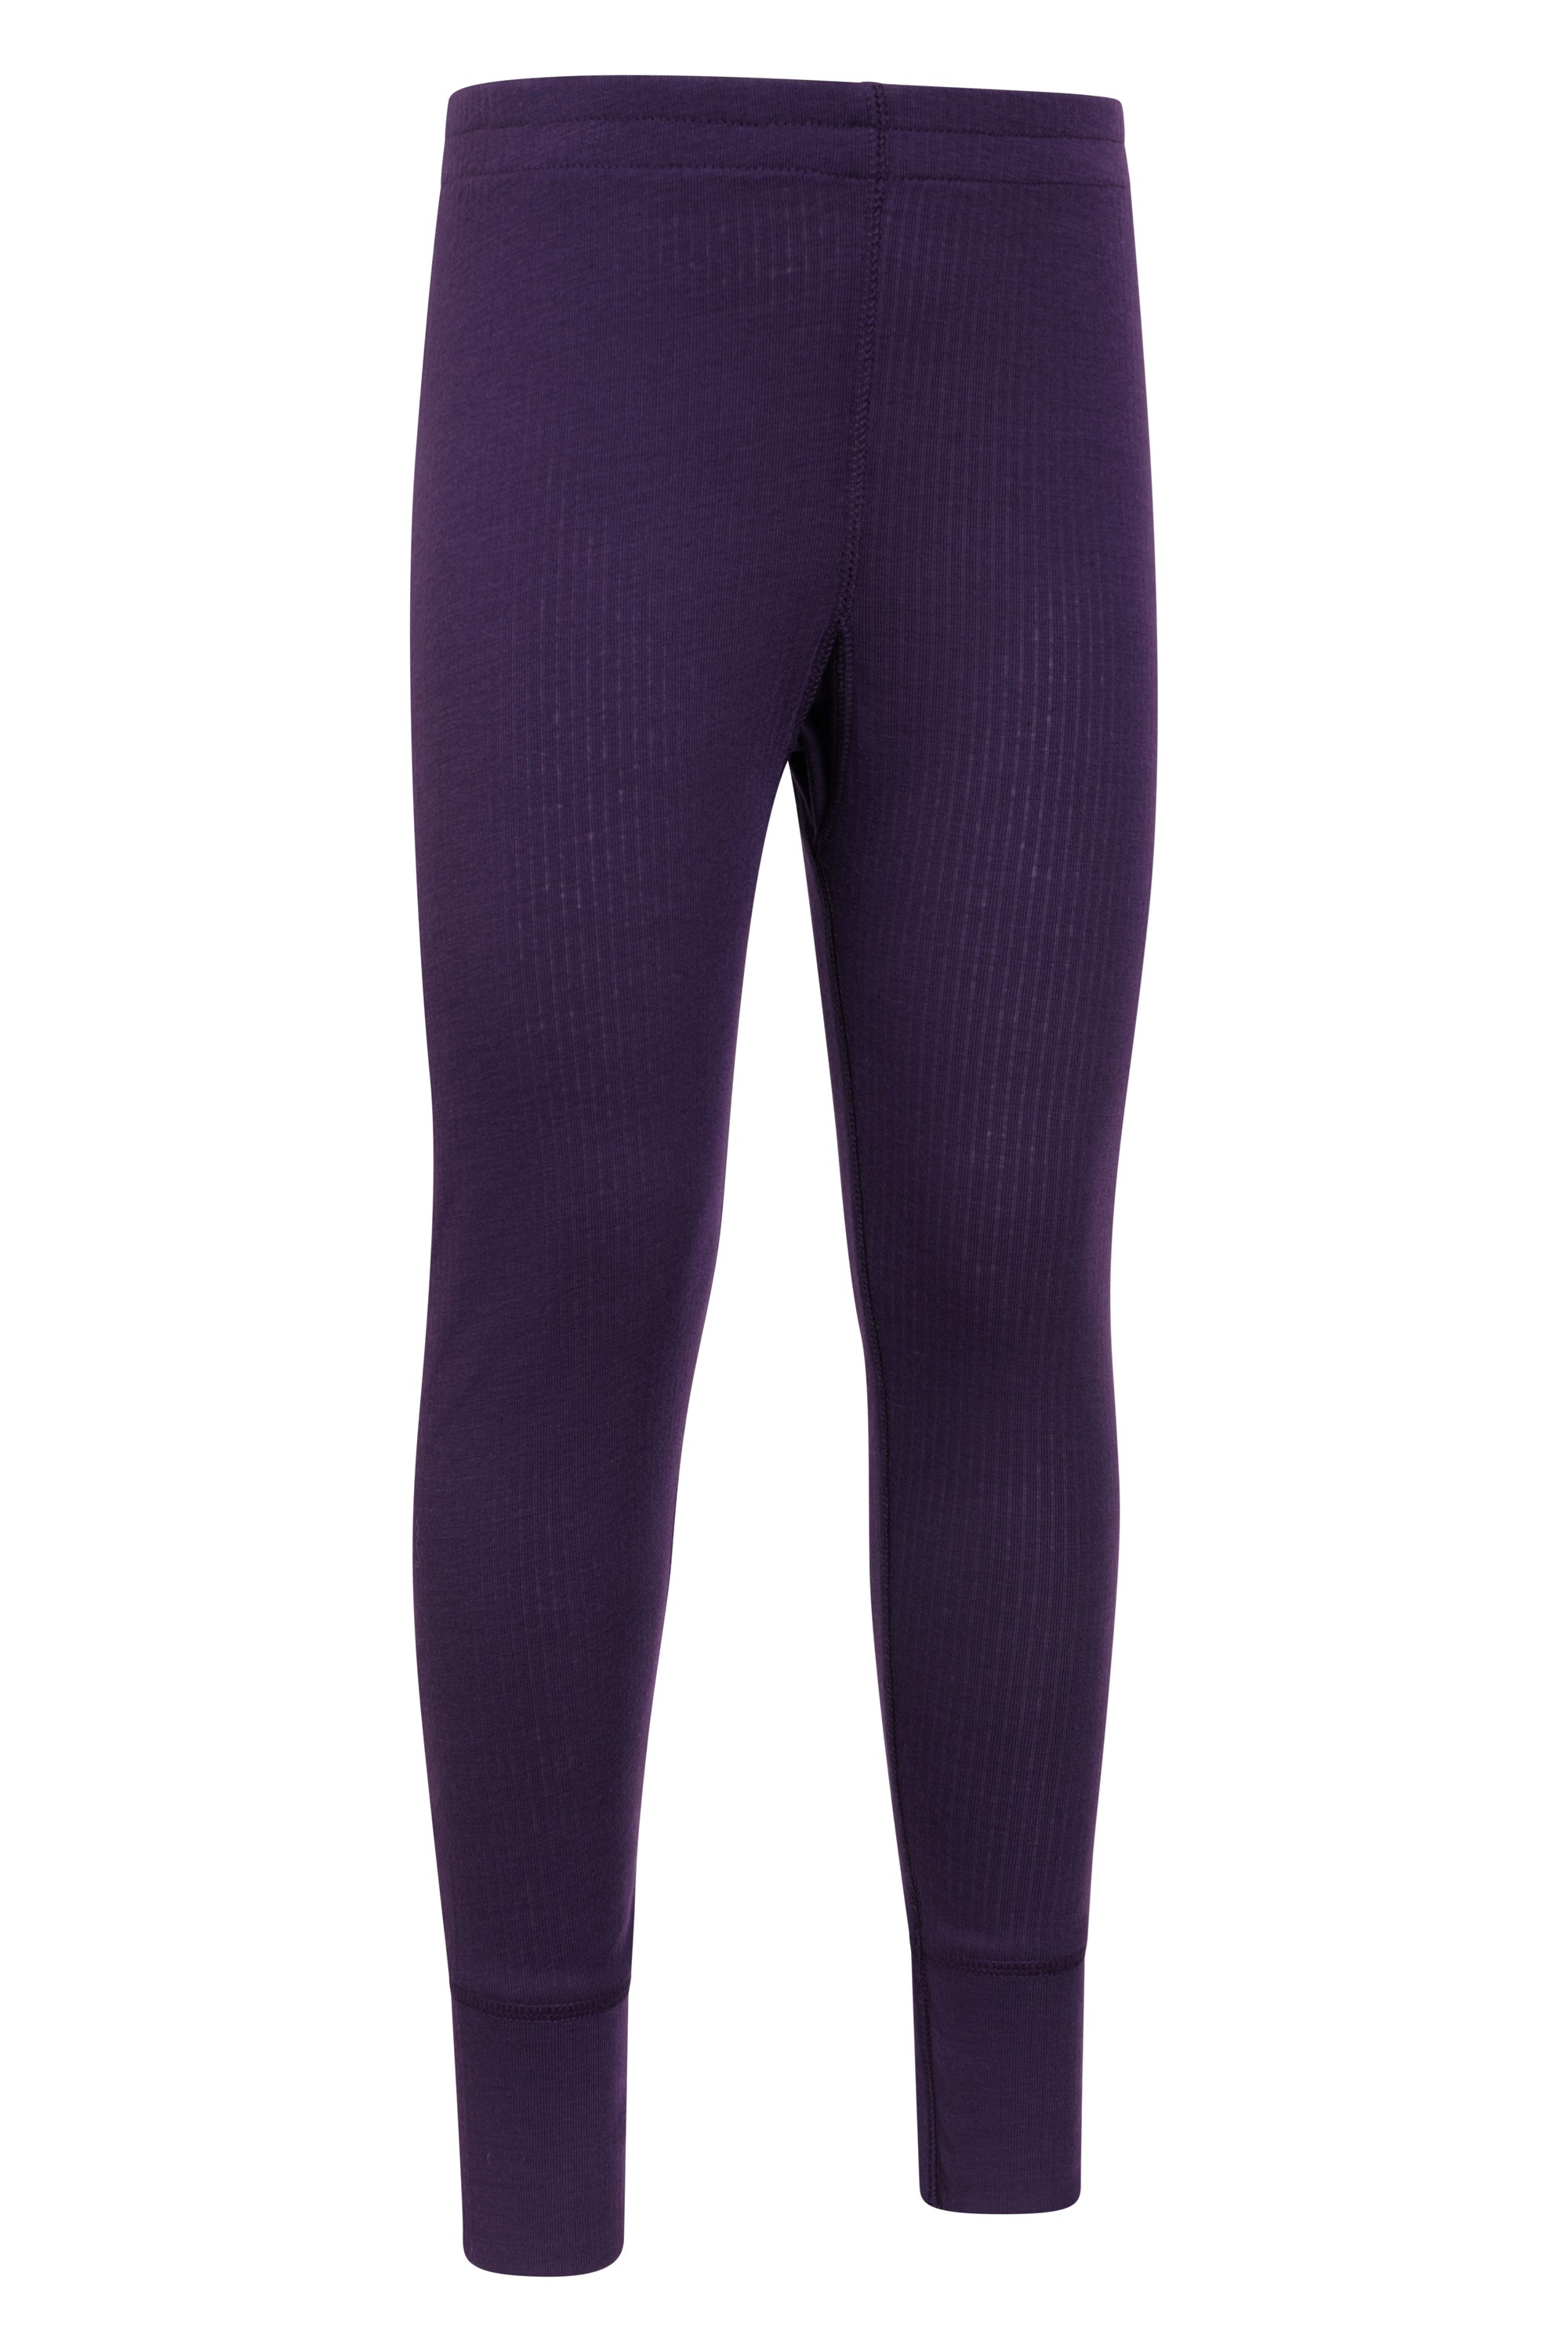 Mountain Warehouse Talus Kids Thermal Baselayer Trousers - Quick Dry - for  Camping in Dark Purple 13 Years : : Fashion